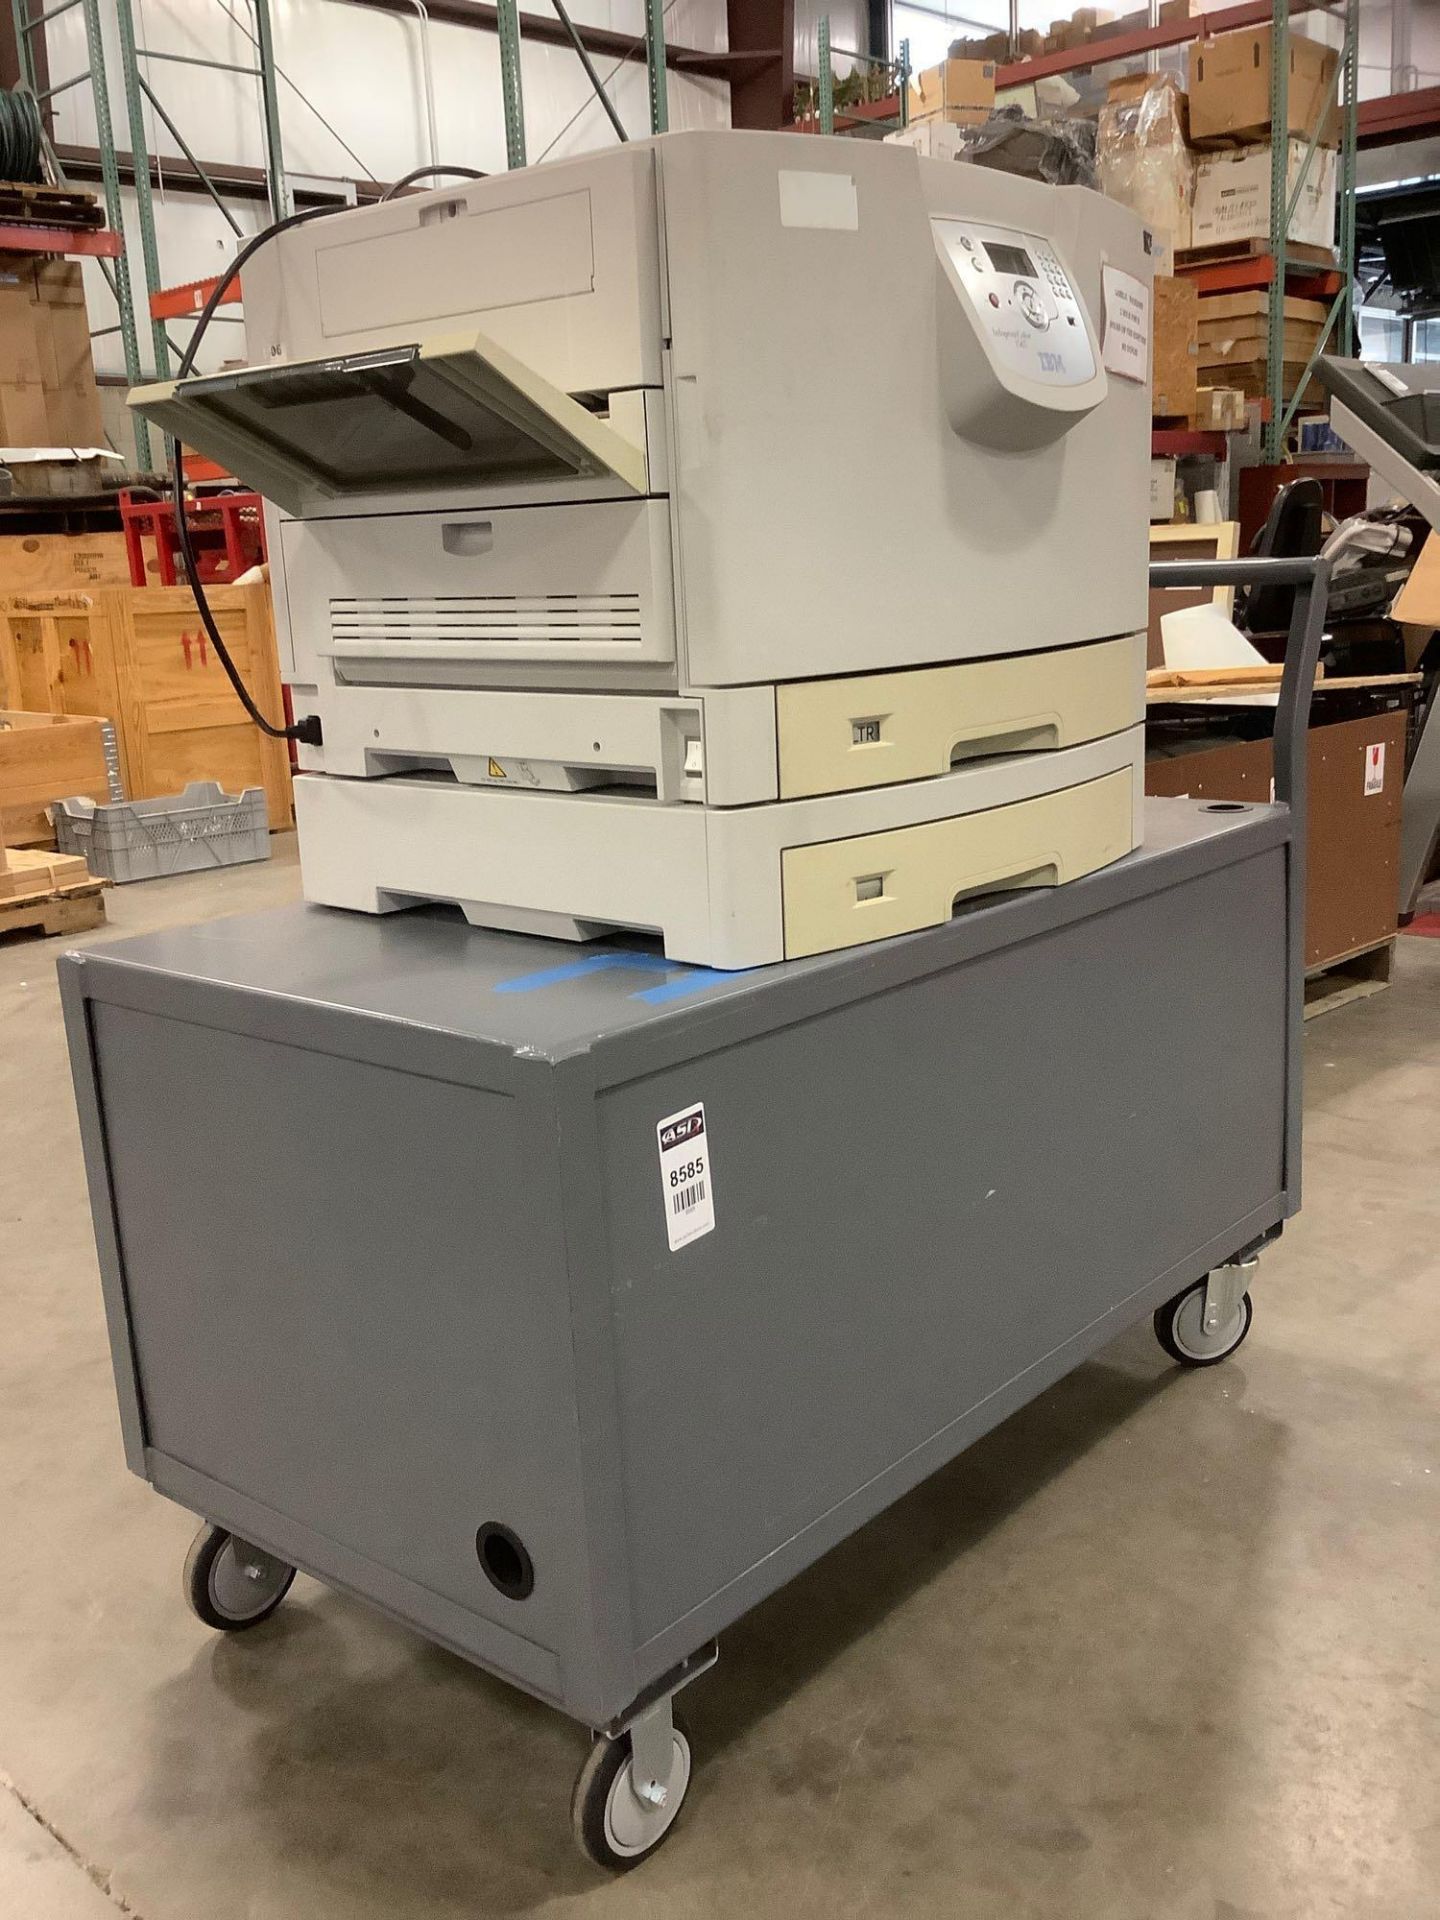 IBM INFORPRINT COLOR 1567 PRINTER TYPE 4935 ON ROLLING CART STAND - Image 6 of 18